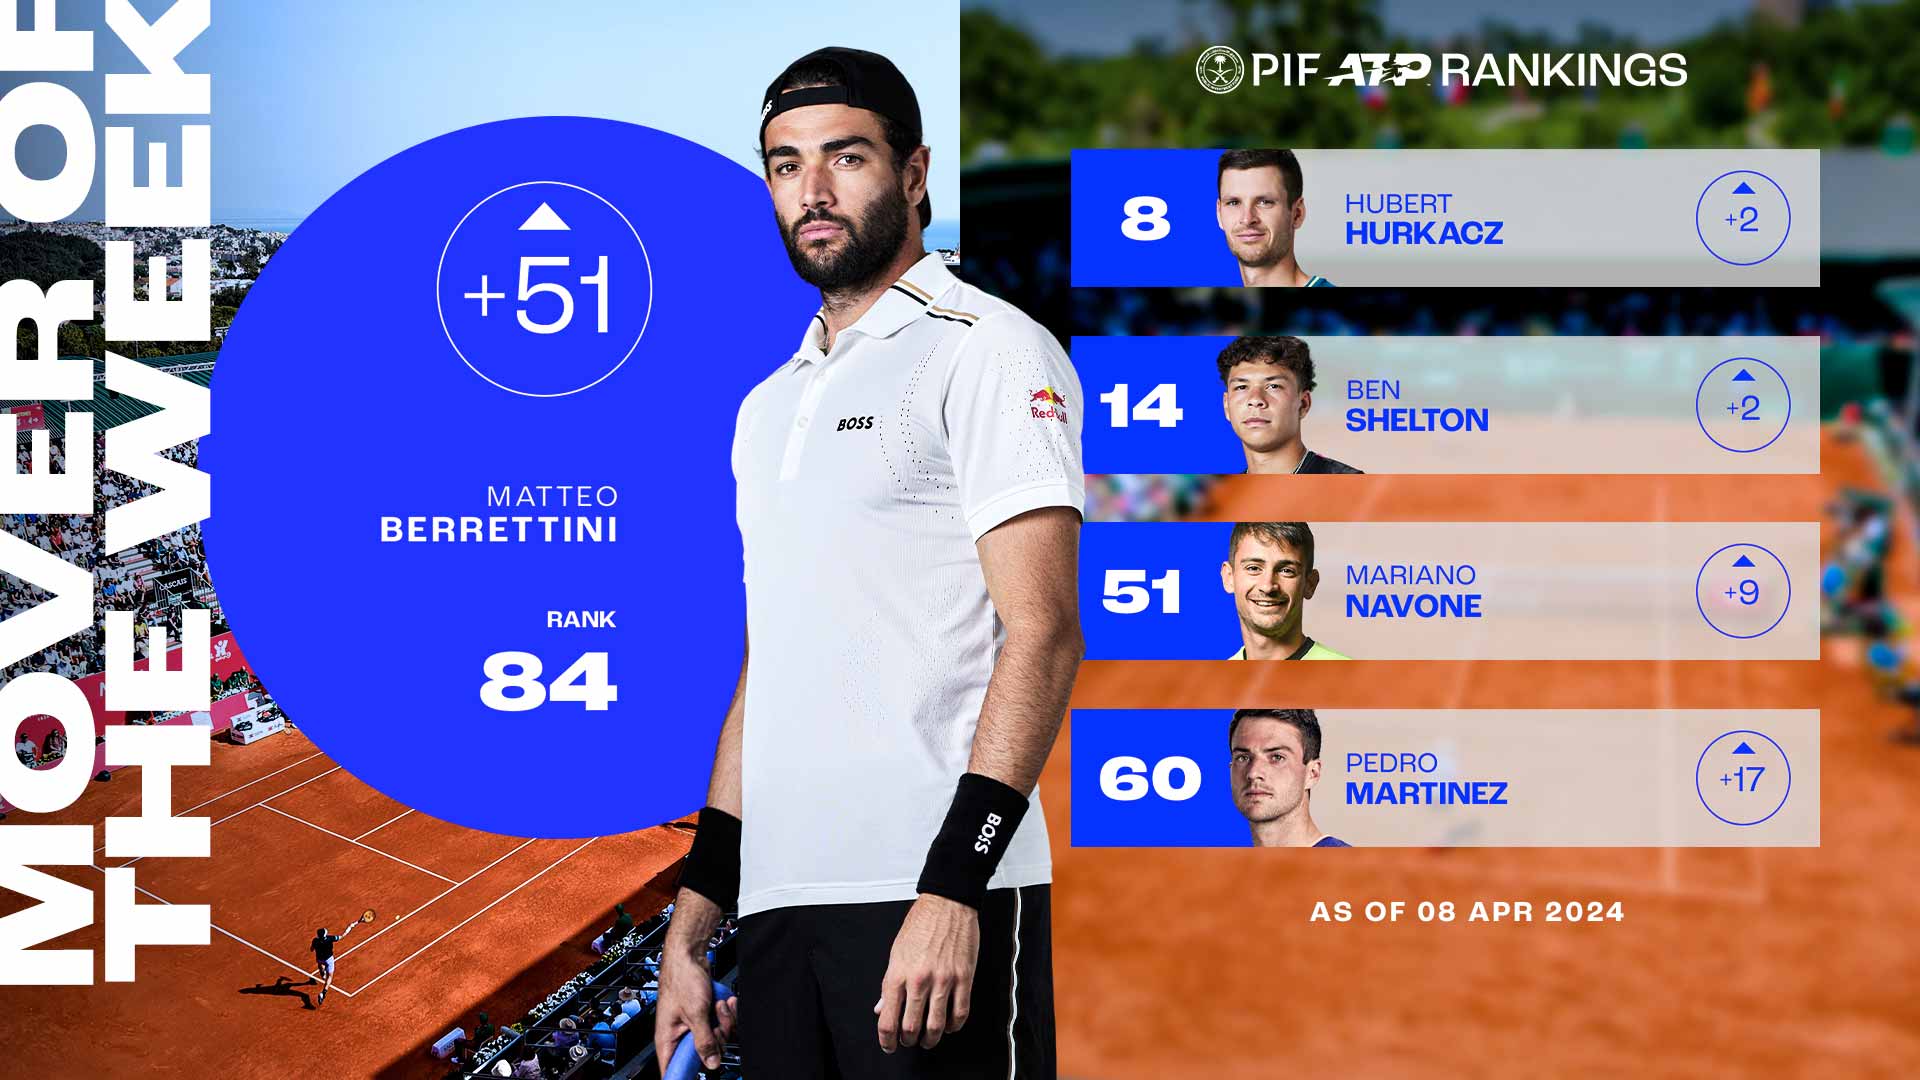 Matteo Berrettini has returned to the Top 100 of the PIF ATP Rankings after winning the title in Marrakech.